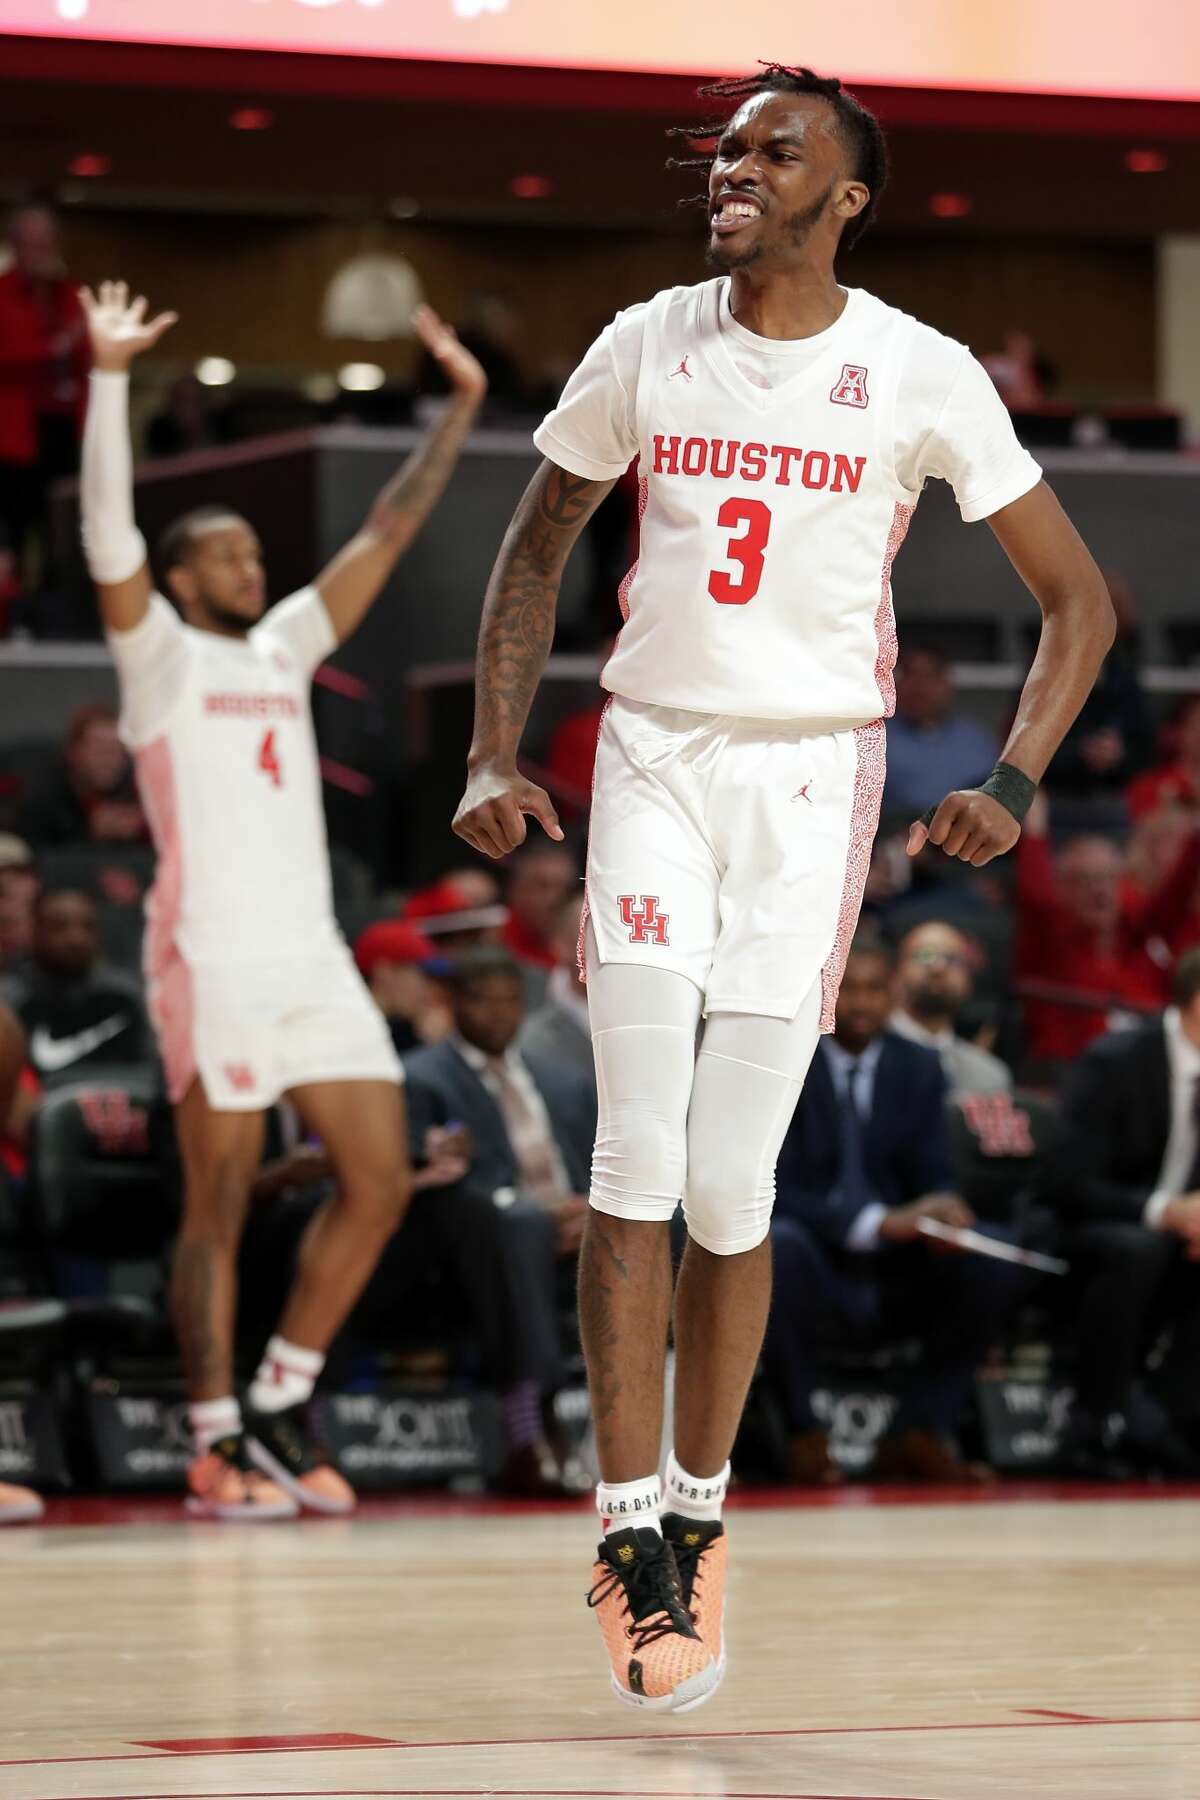 Houston guard DeJon Jarreau (3) reacts after a dunk during the second half of their game against UTEP Thursday, Dec. 19, 2019 in Houston, TX.